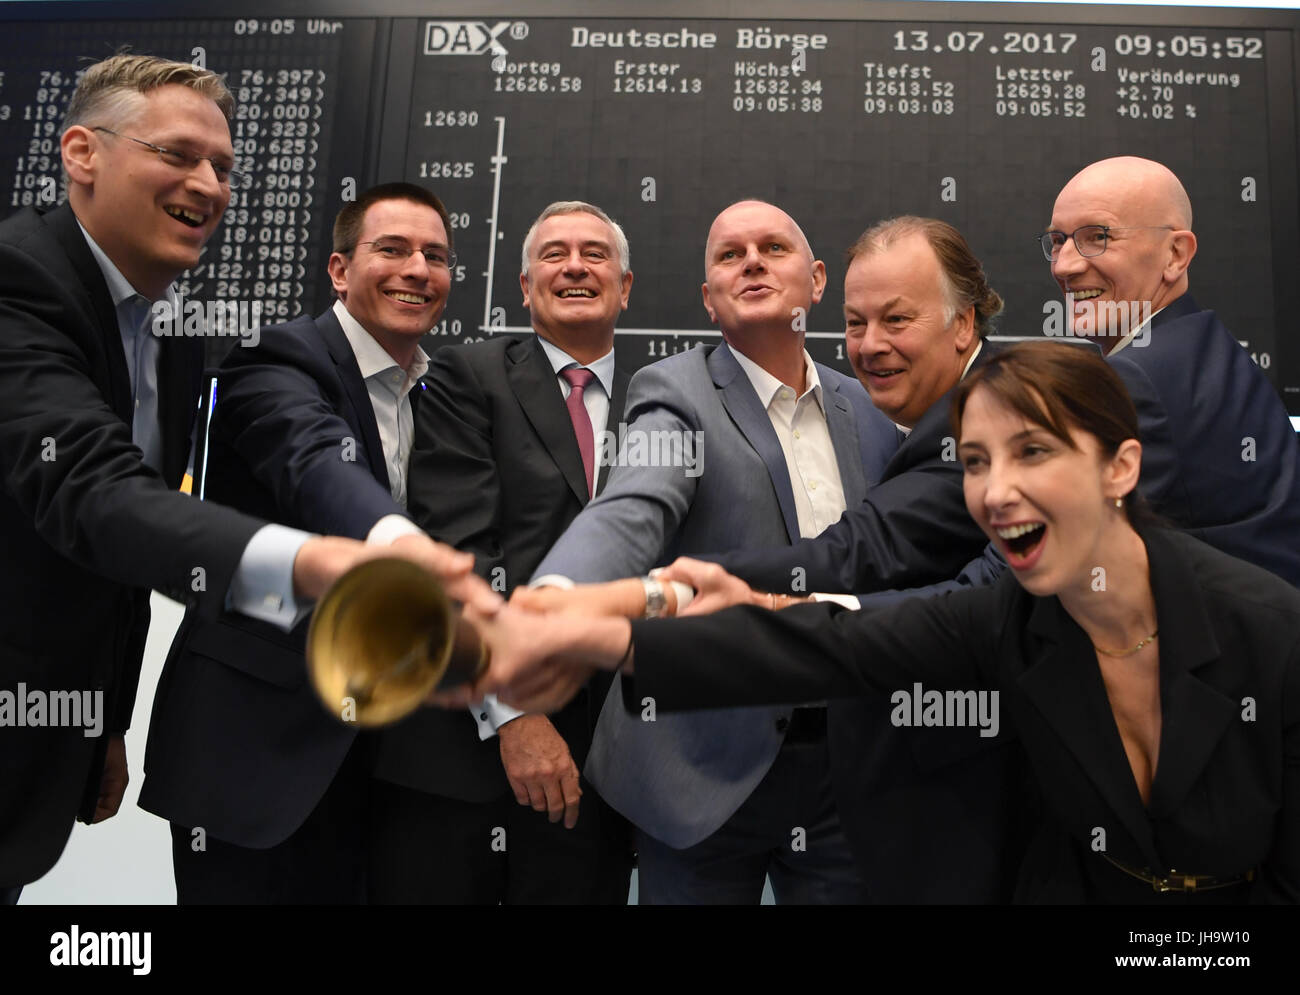 dpatop - Olaf Koch (C), CEO of der Metro Wholesale & Food Specialist AG, rings the stock exchange bell beside Gregor Pottmeyer (3.f.l), CFO of Deutsche Boerse AG, and Metro board members Christoph Kaemper (l-r), Christian Baier, Pieter Boone, Veronika Pountcheva and Heiko Hutmacher, during the flotation of the new Metro on the trading floor at the stock exchange in Frankfurt am Main, Germany, 13 July 2017. Photo: Arne Dedert/dpa Stock Photo